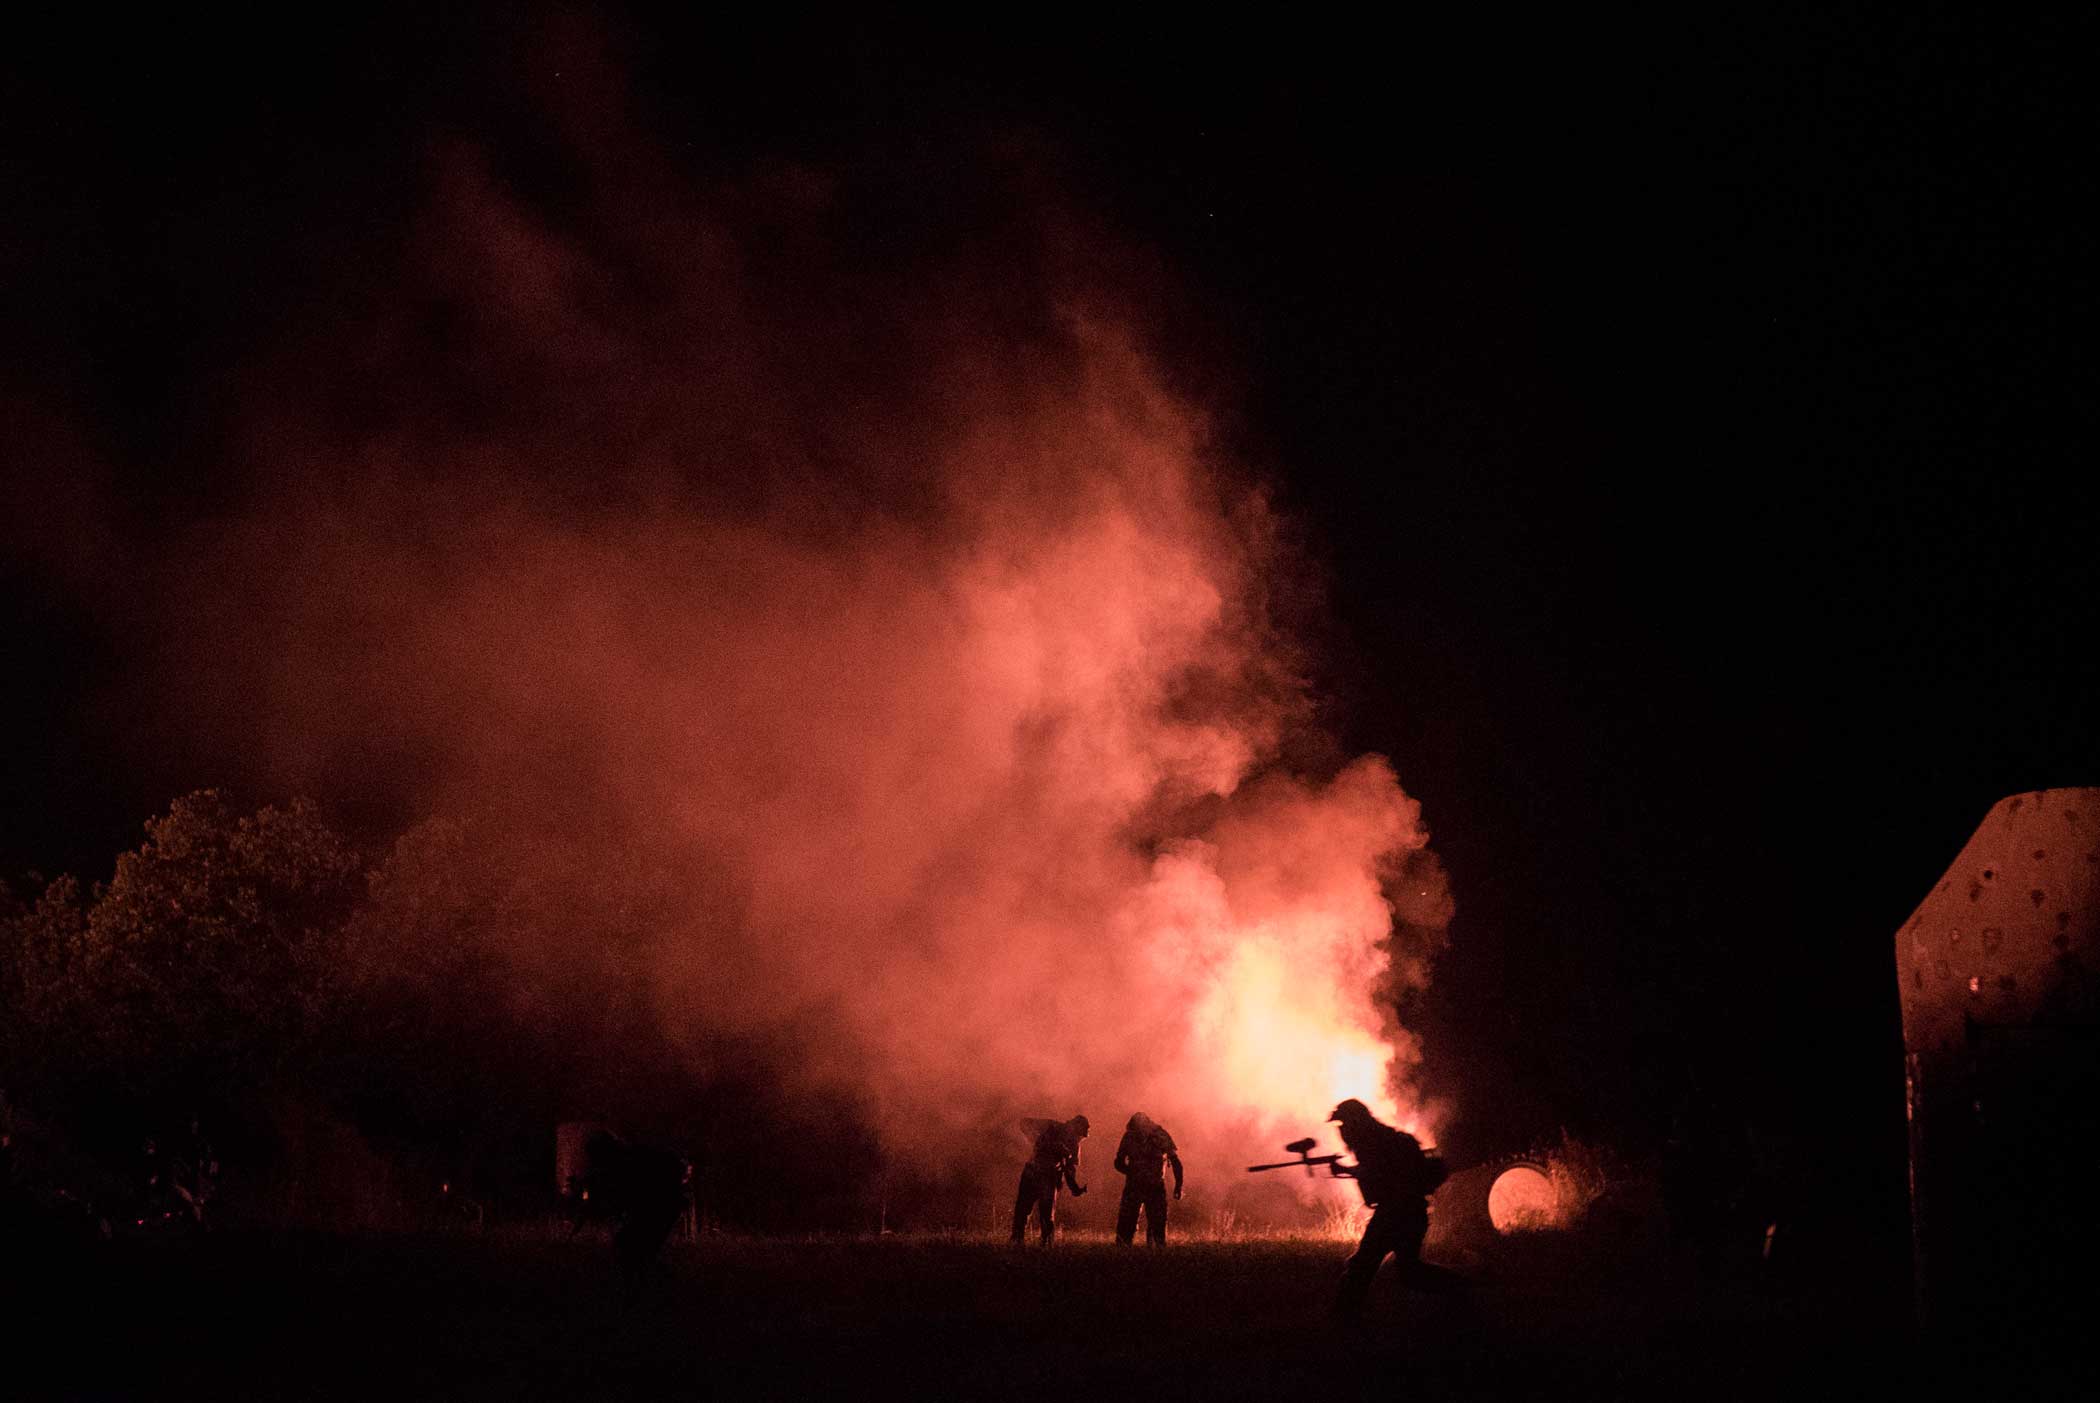 A night battle in Colleville. Flares were popped to illuminate the darkness.